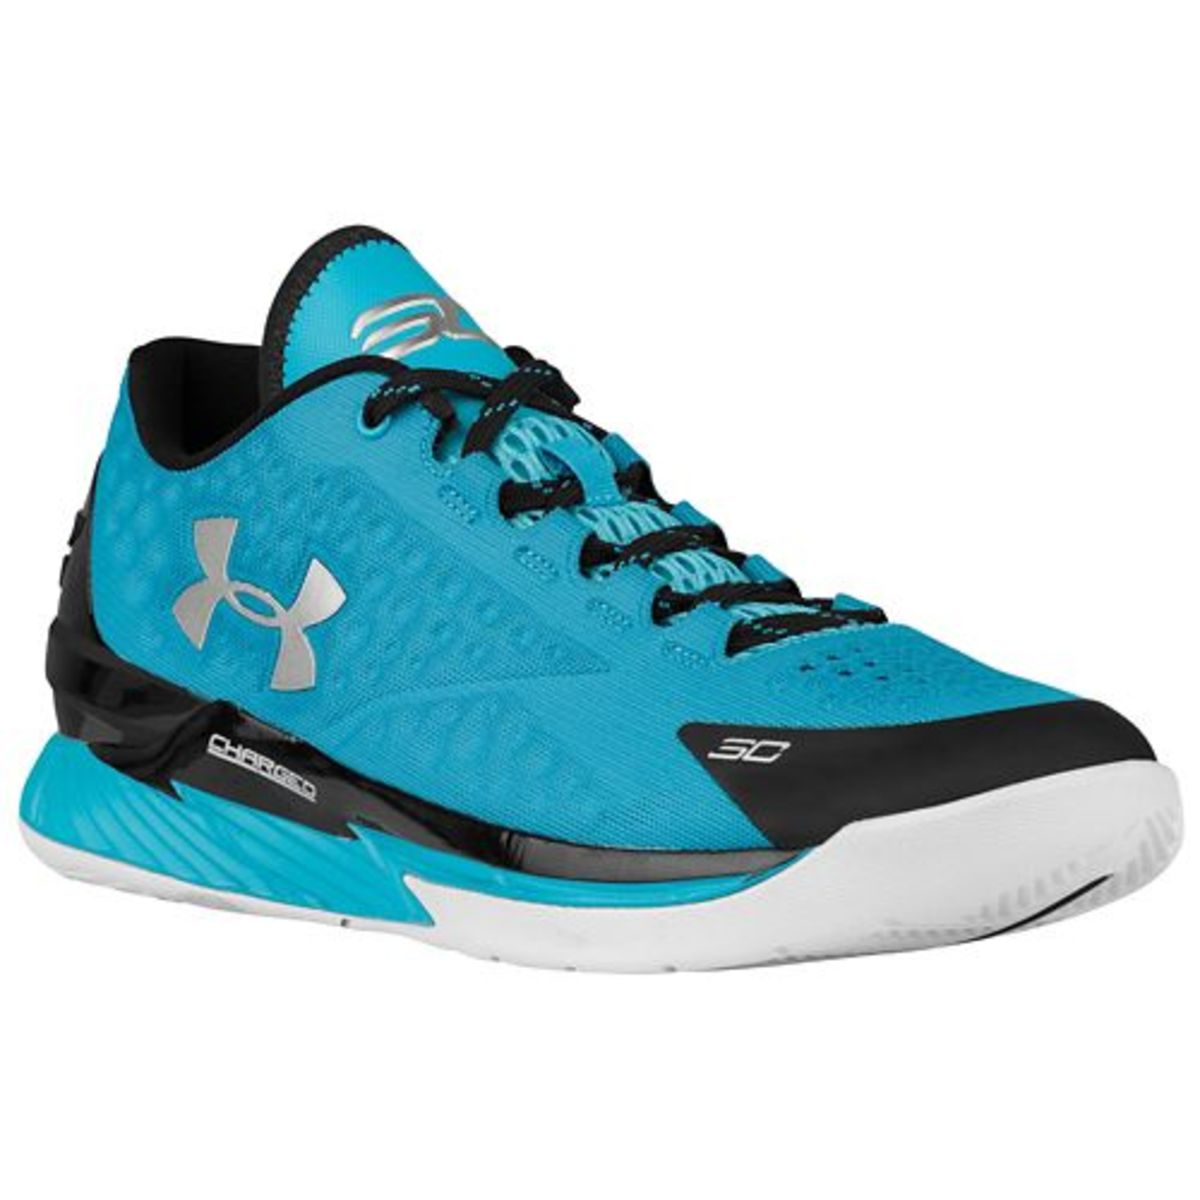 Under Armour Charged Foam Curry 1 Low - Men's